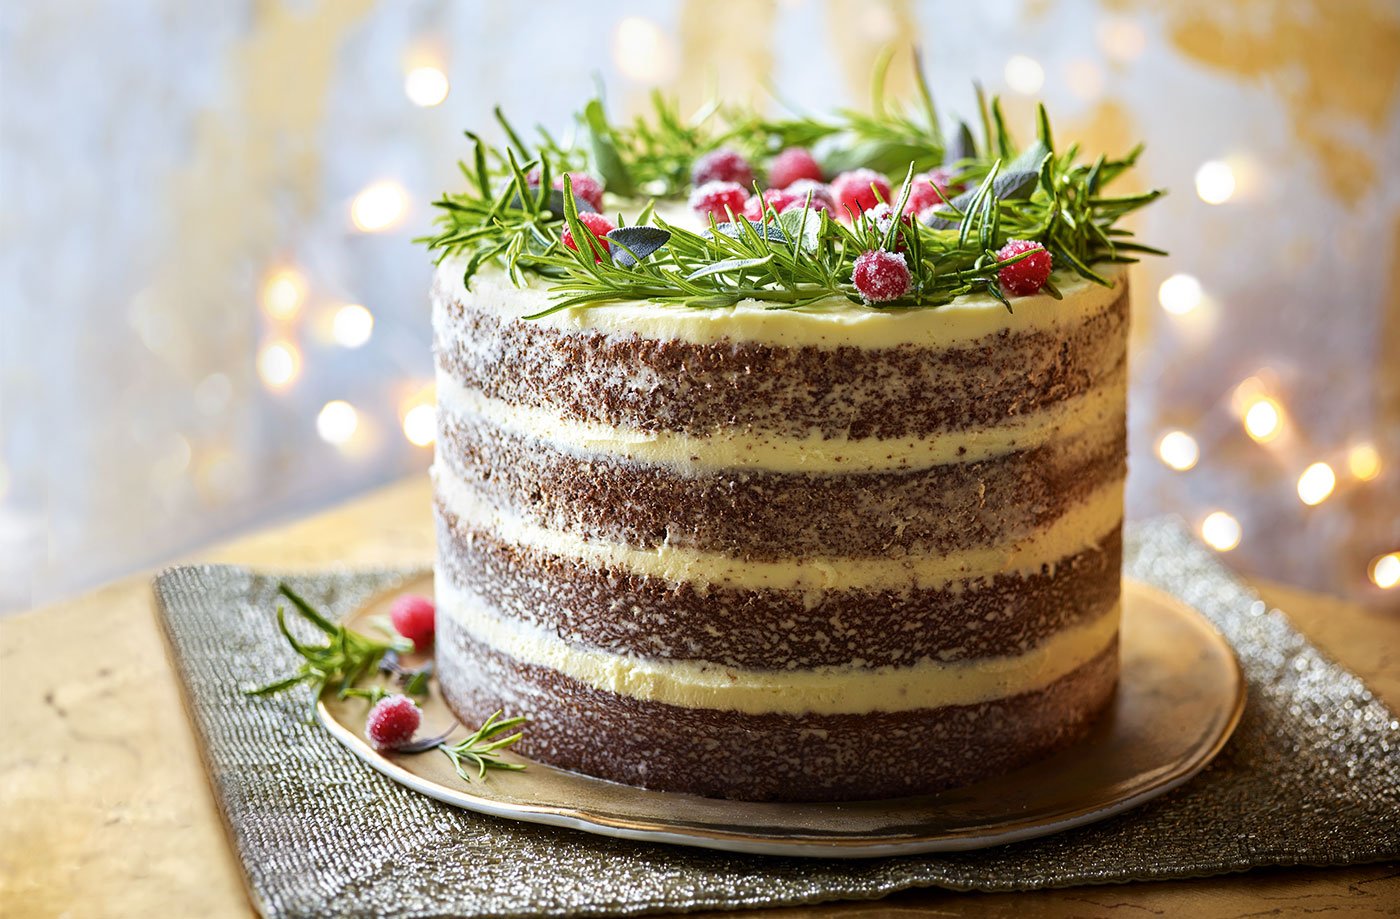 Top 6 Places In Delhi Doing The Best Christmas Desserts